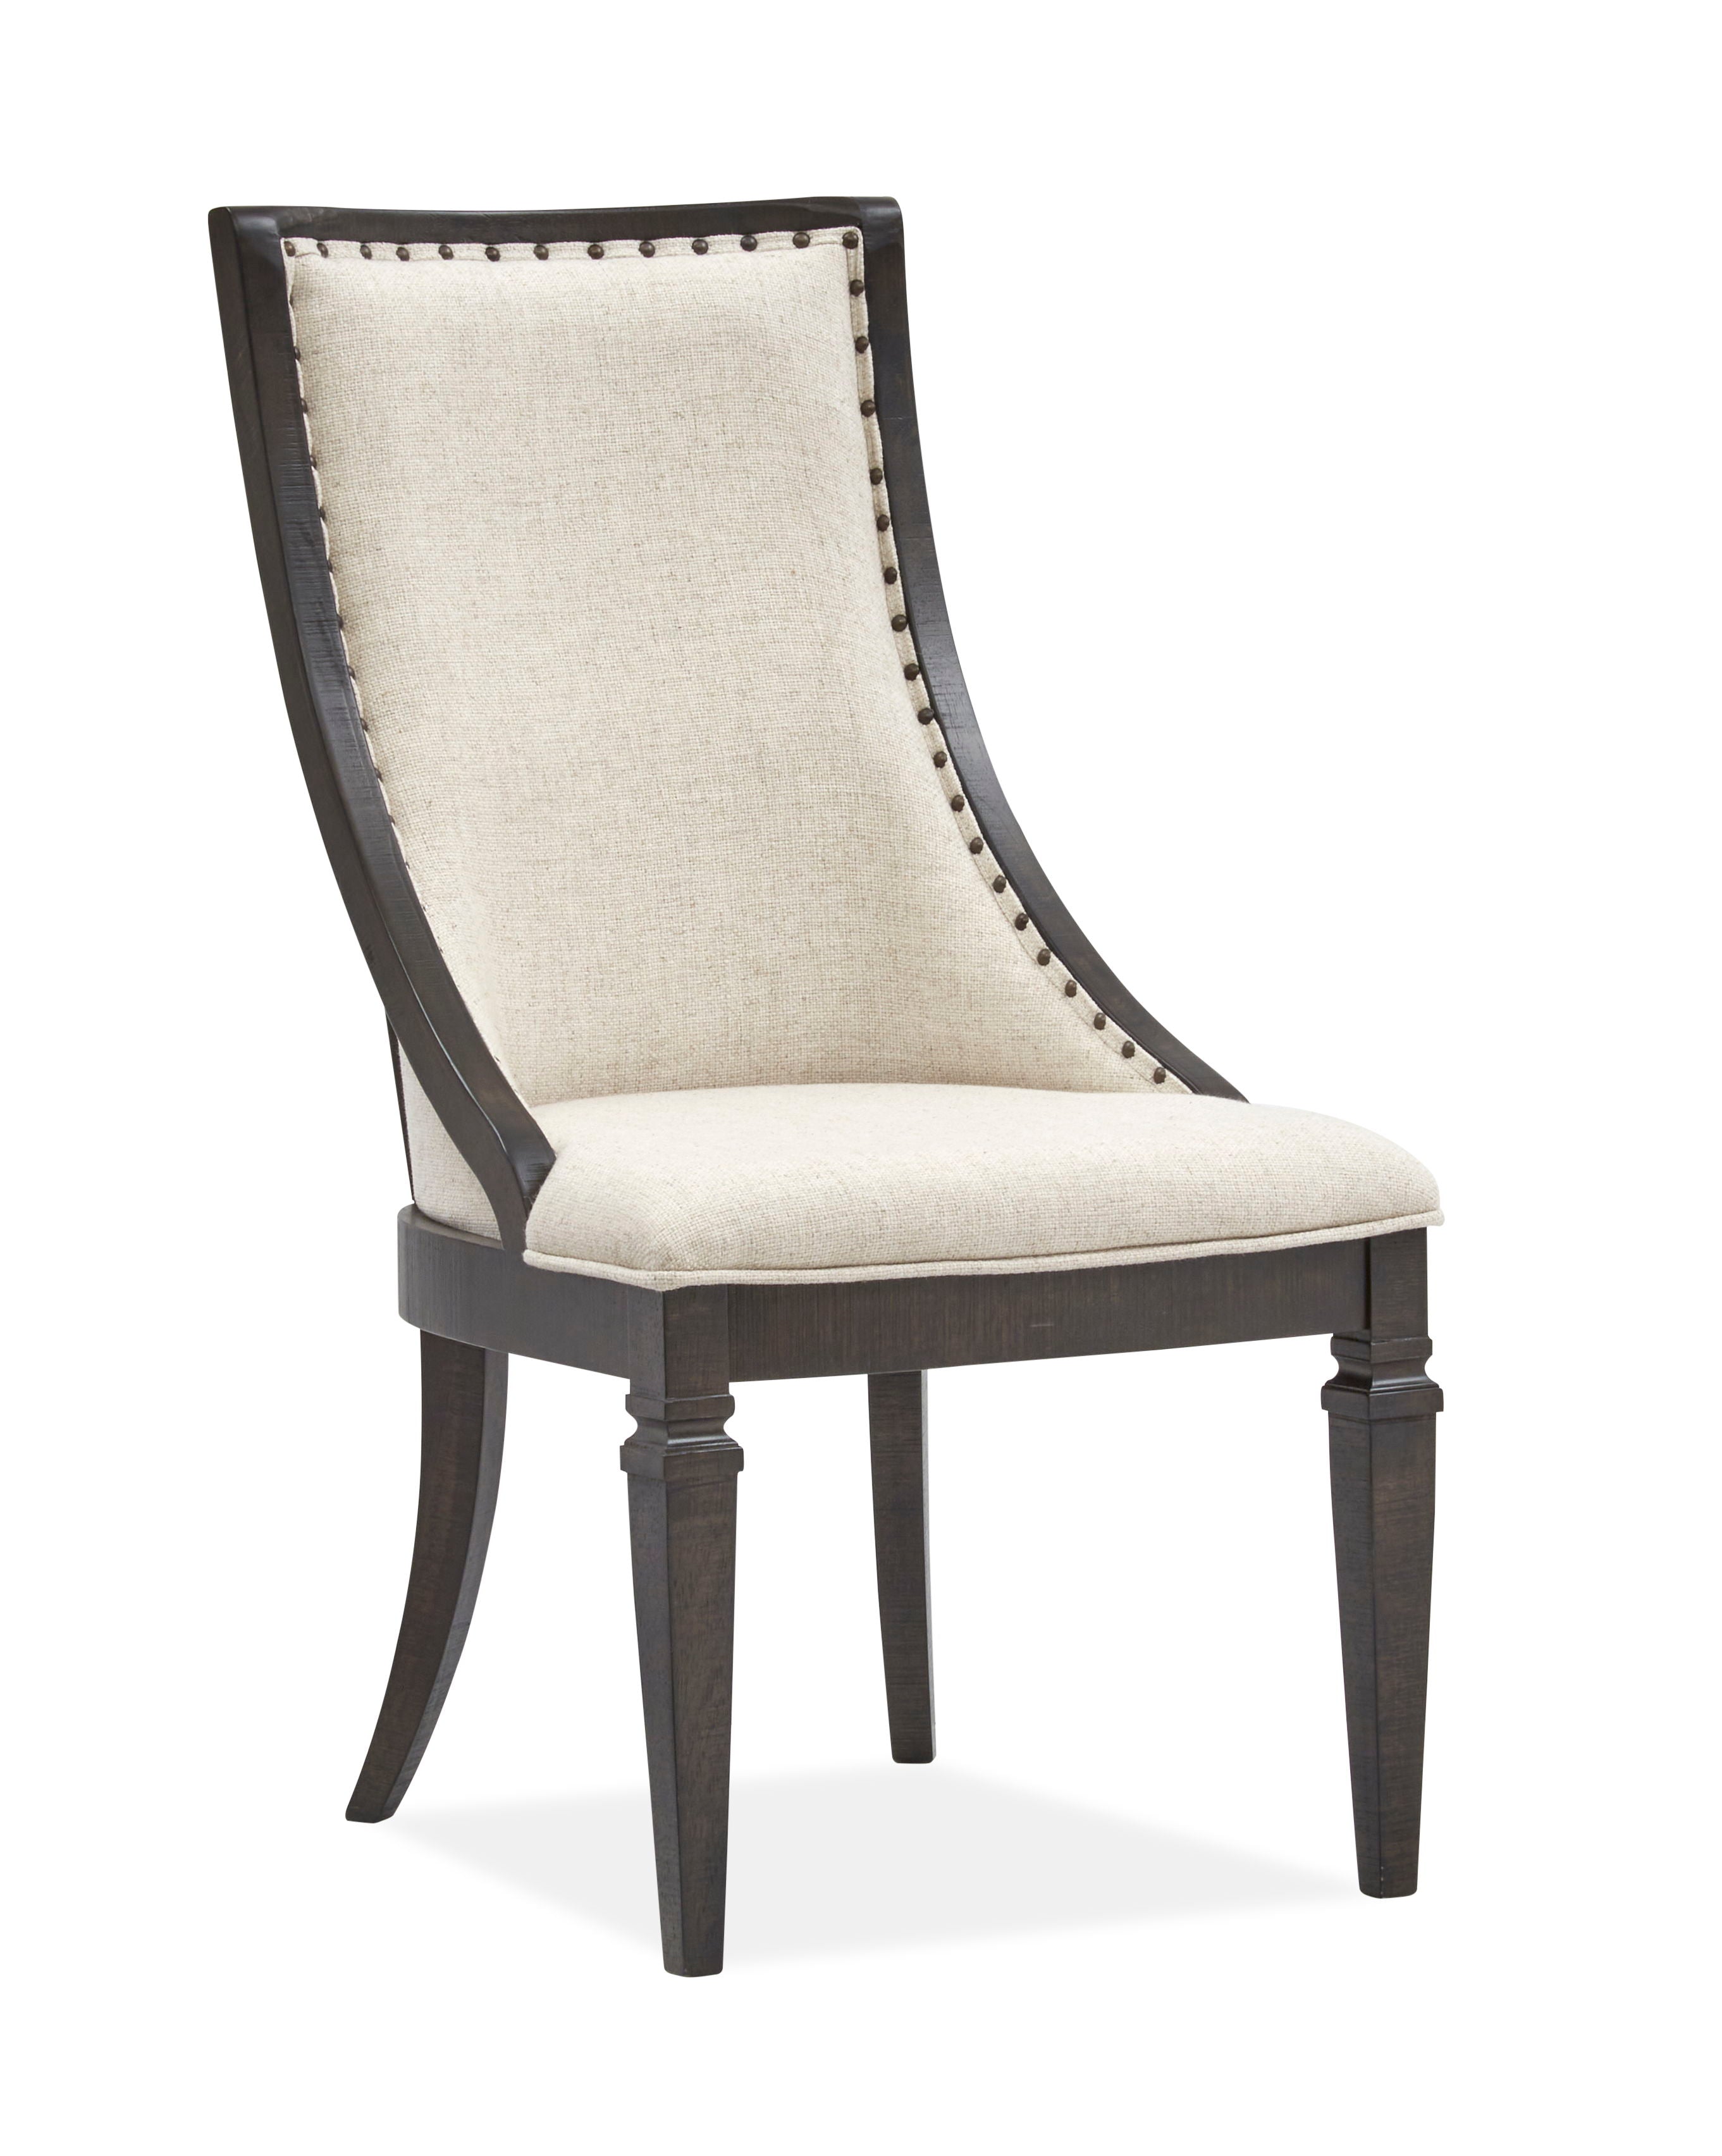 Calistoga - Dining Arm Chair With Upholstered Seat & Back (Set of 2) - Weathered Charcoal